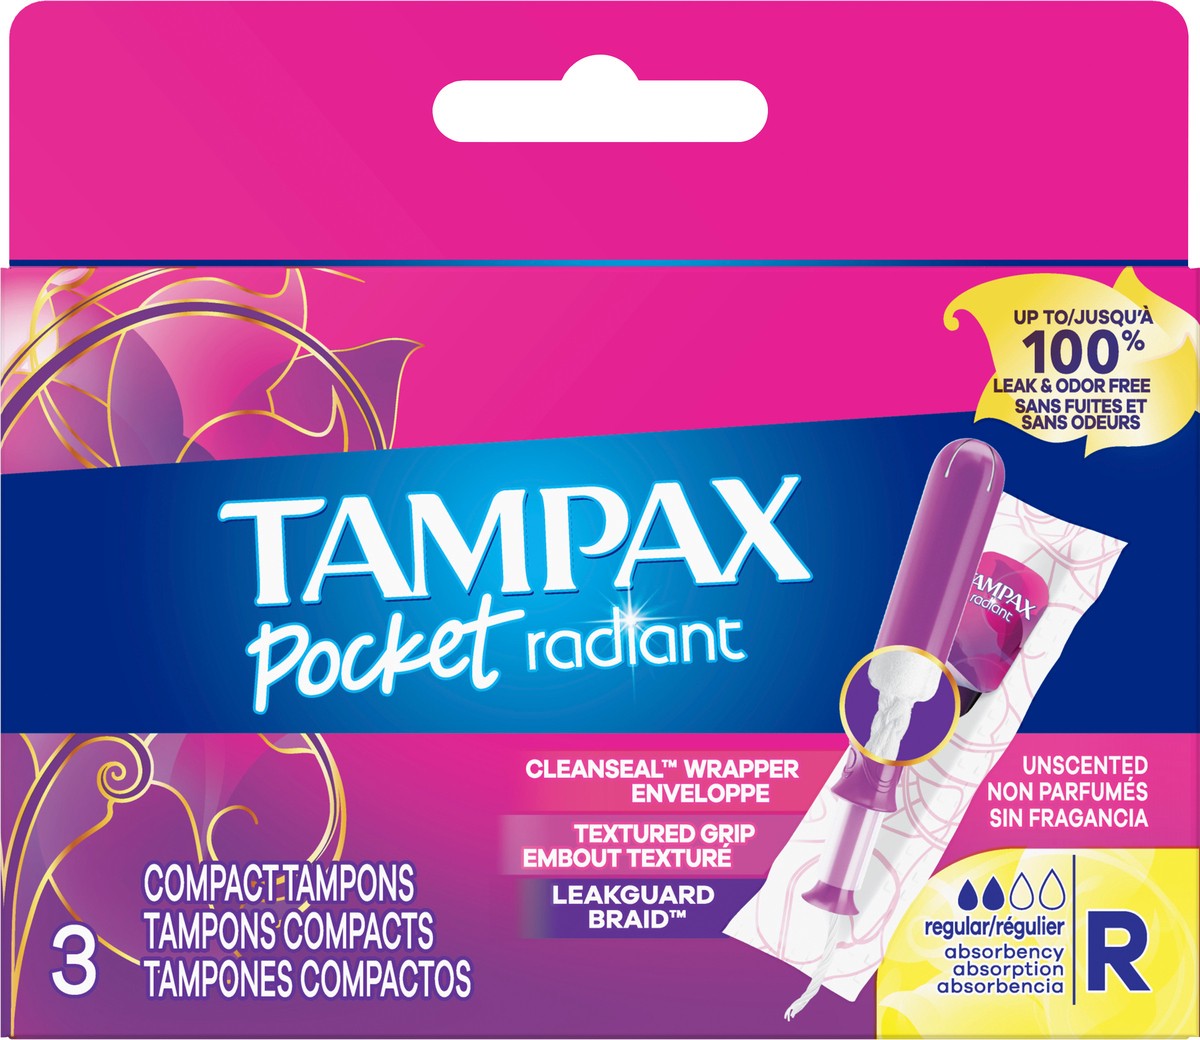 slide 4 of 7, Tampax Pocket Radiant Compact Plastic Tampons, With LeakGuard Braid, Regular Absorbency, Unscented, 3 Count, 3 ct